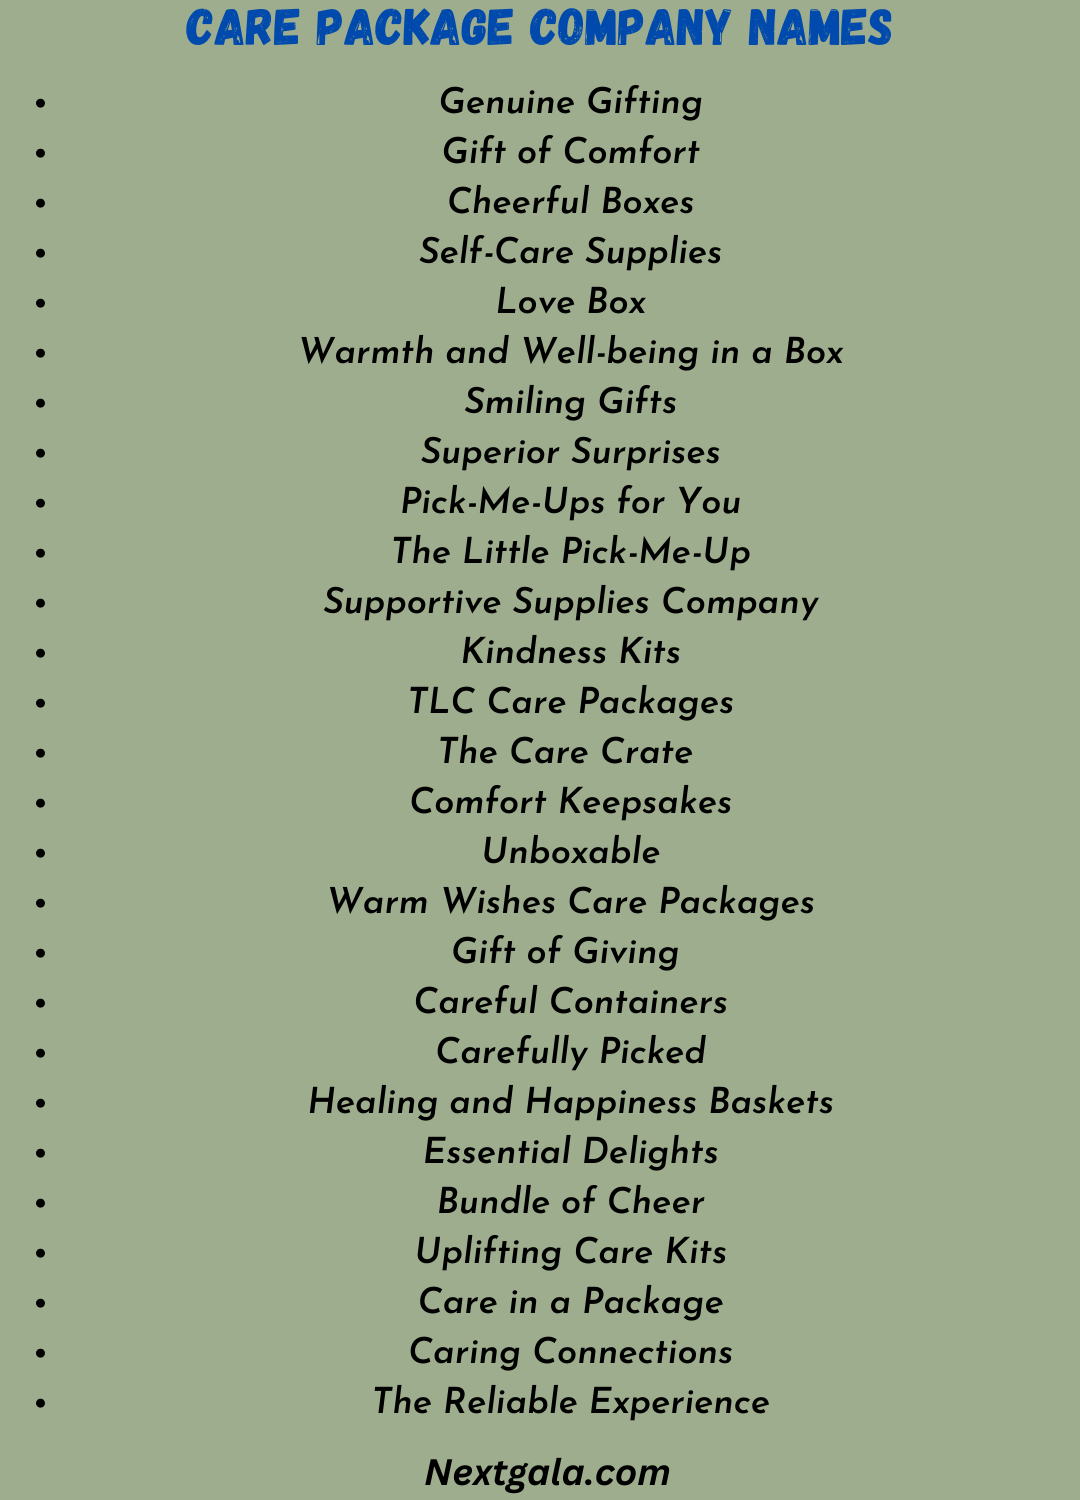 Care Package Company Names